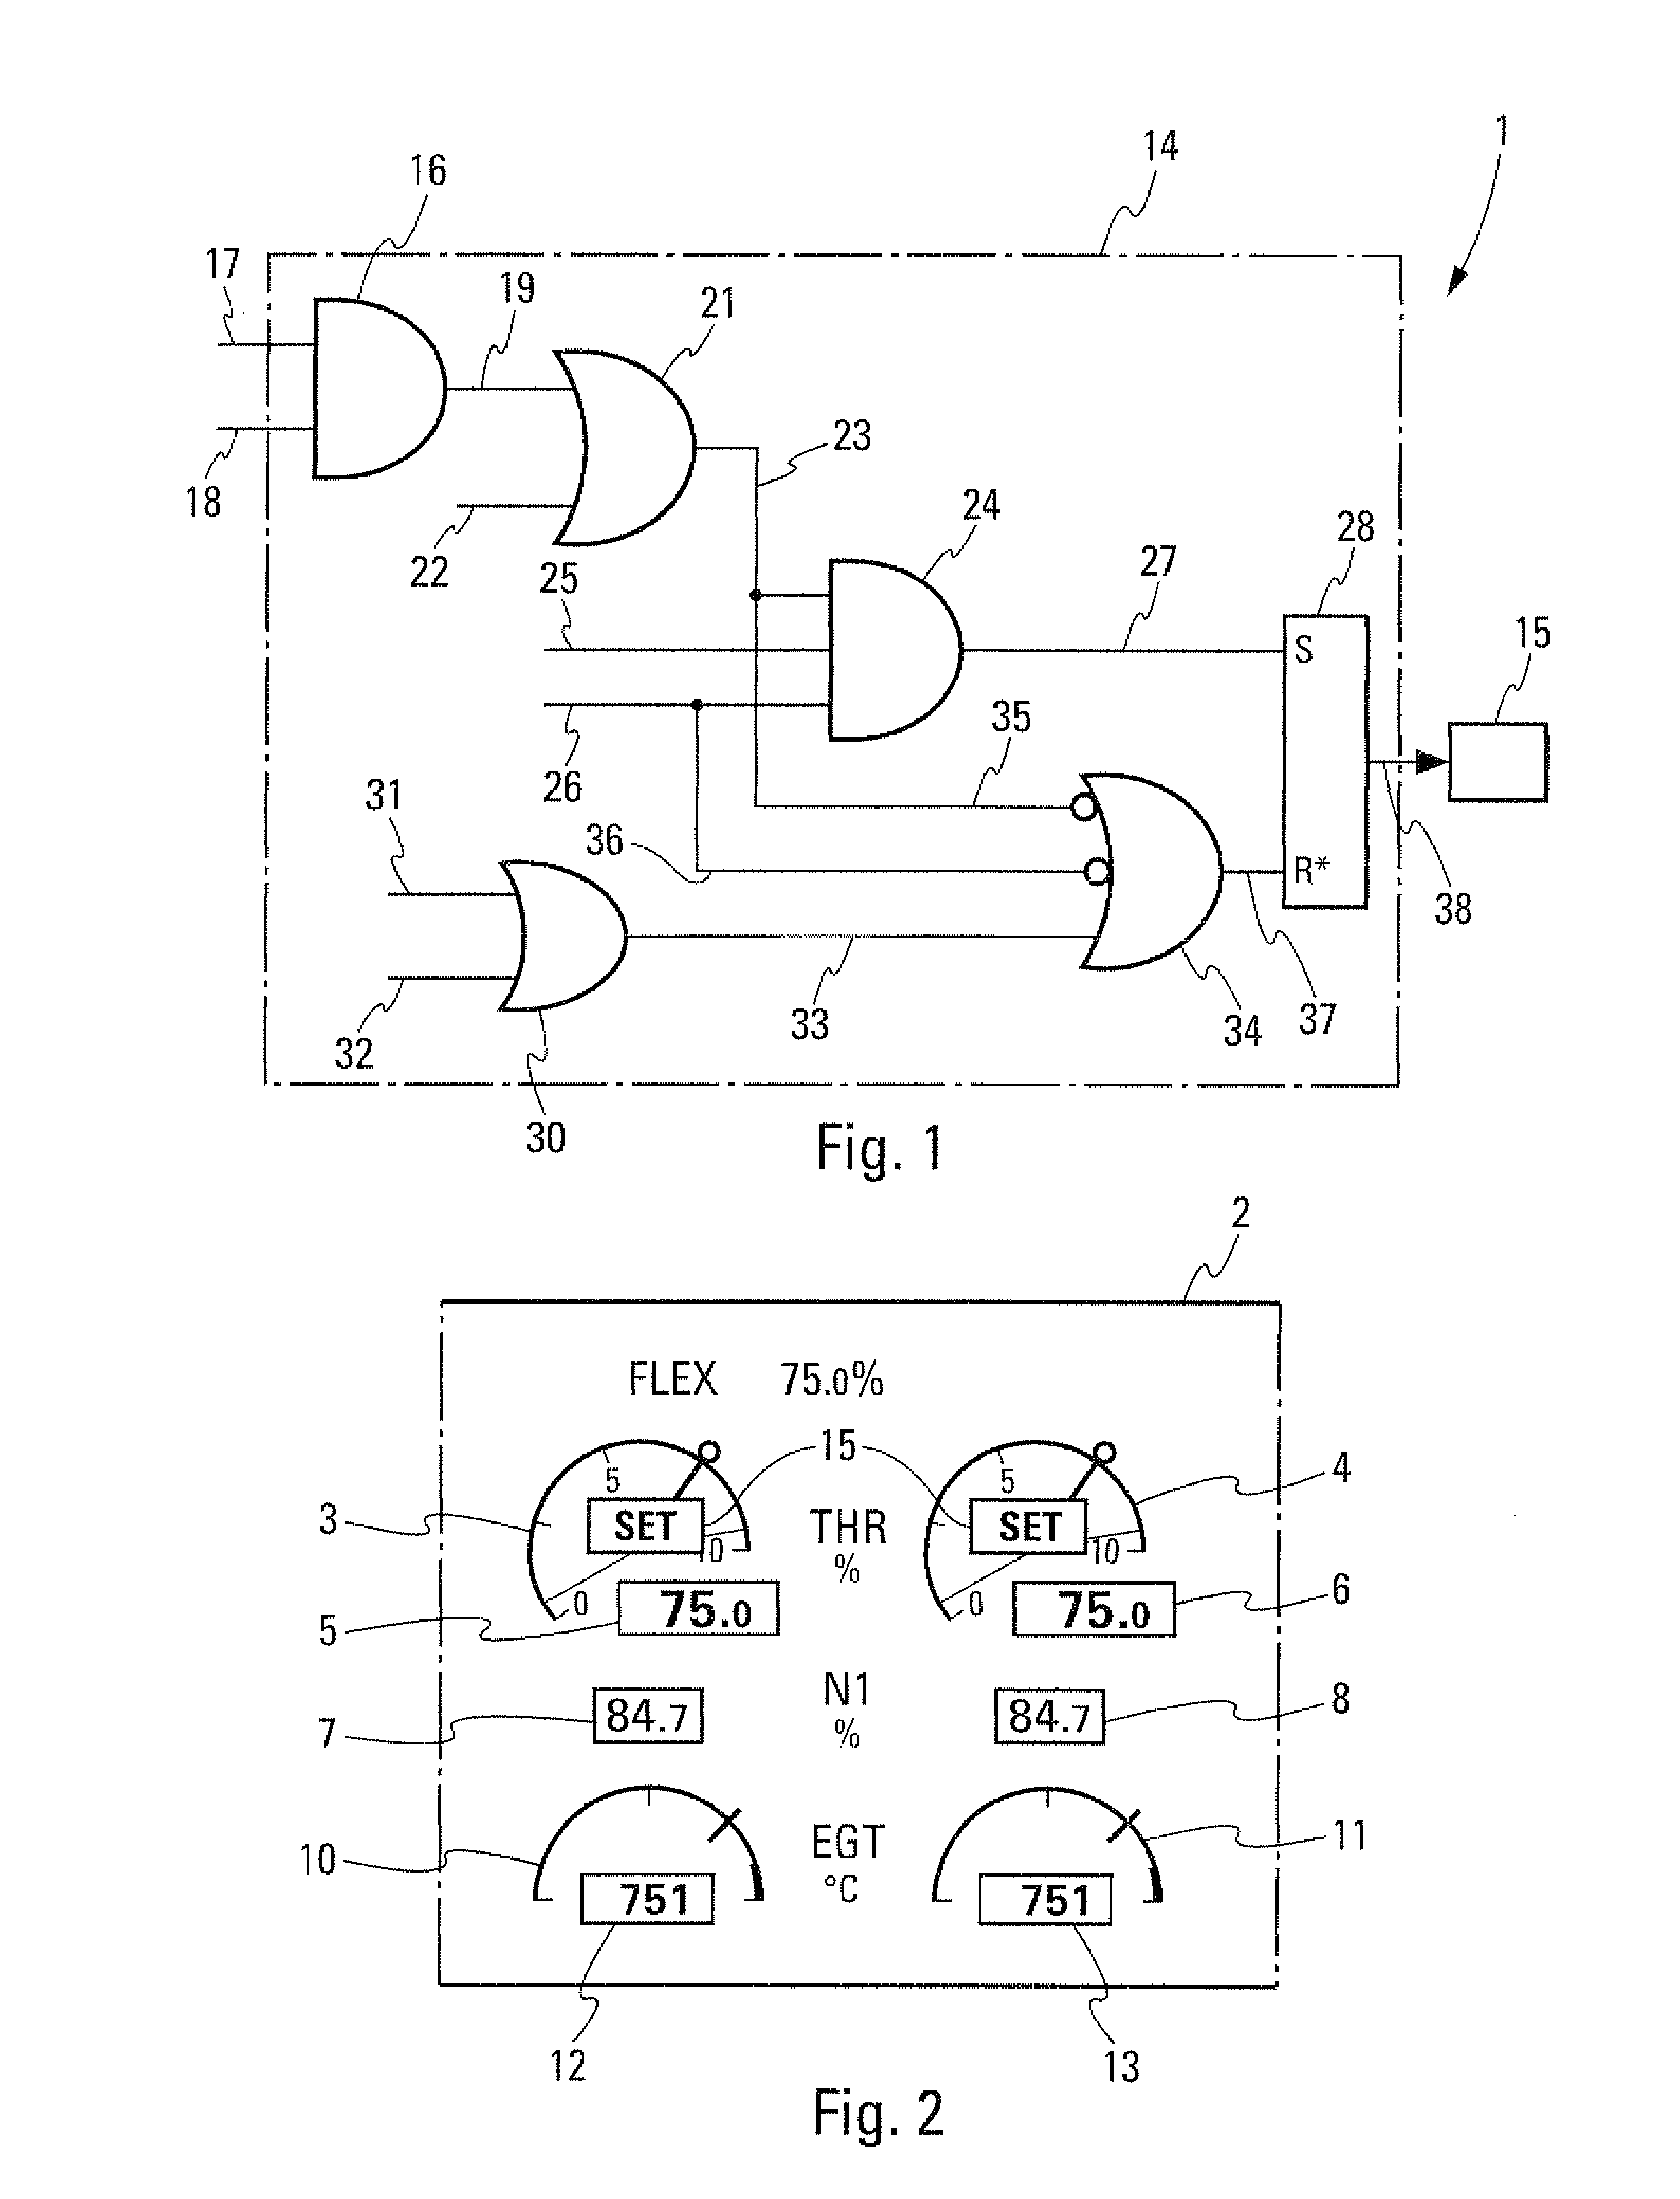 Device for confirming the engine thrust of an aircraft